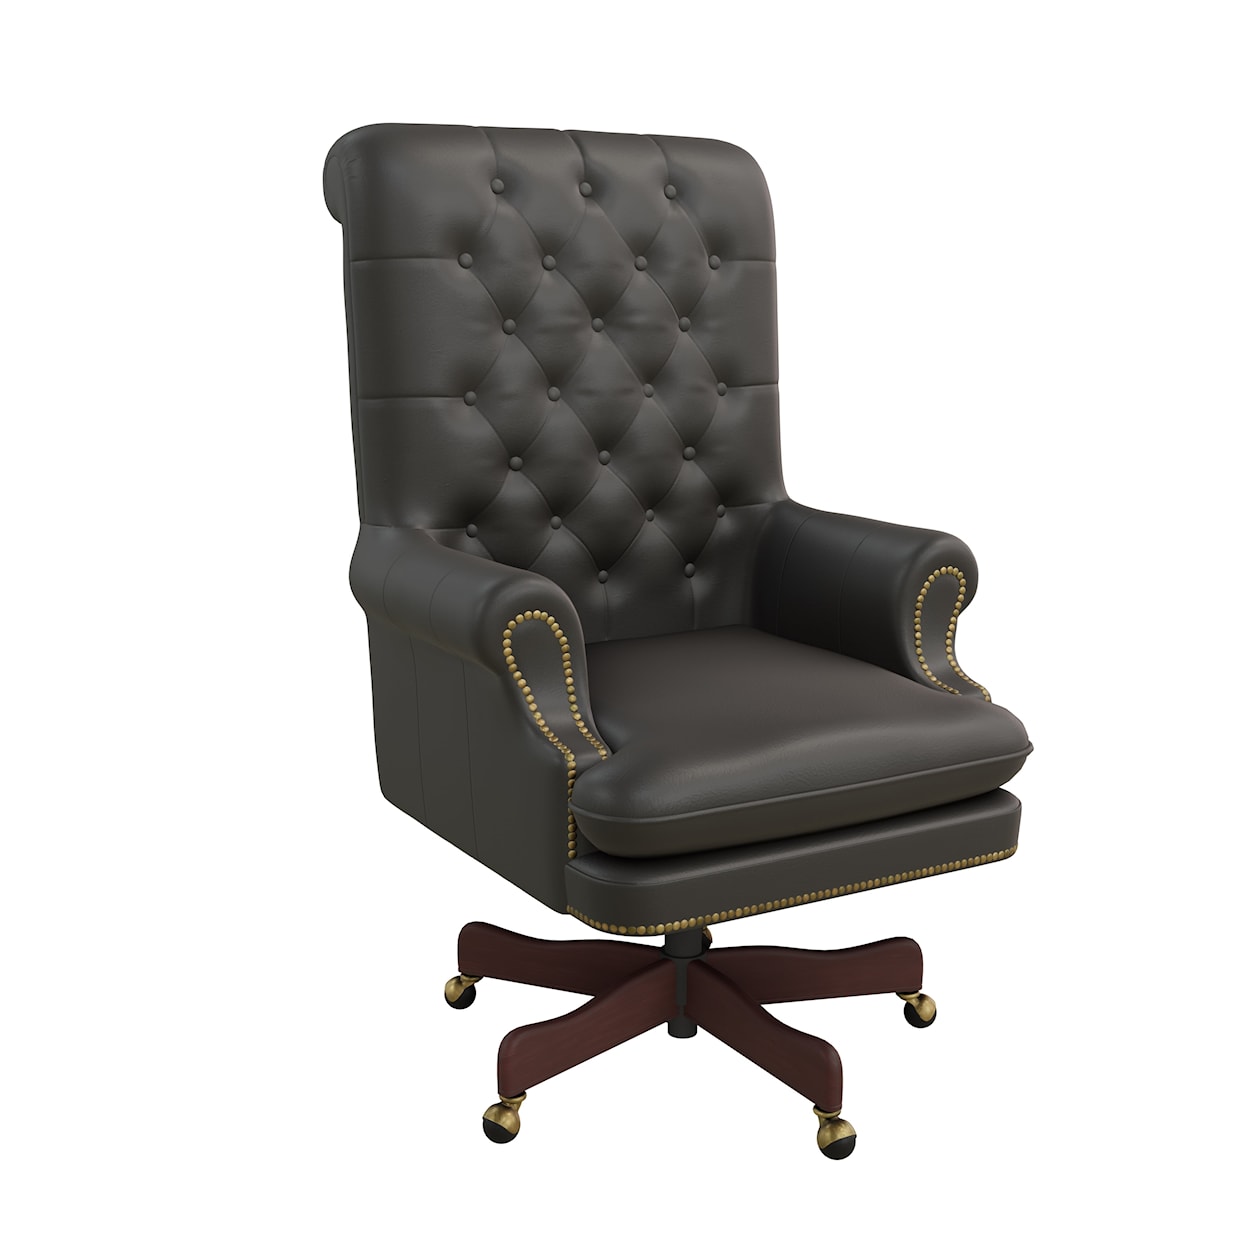 Hekman Office Executive Office Chair